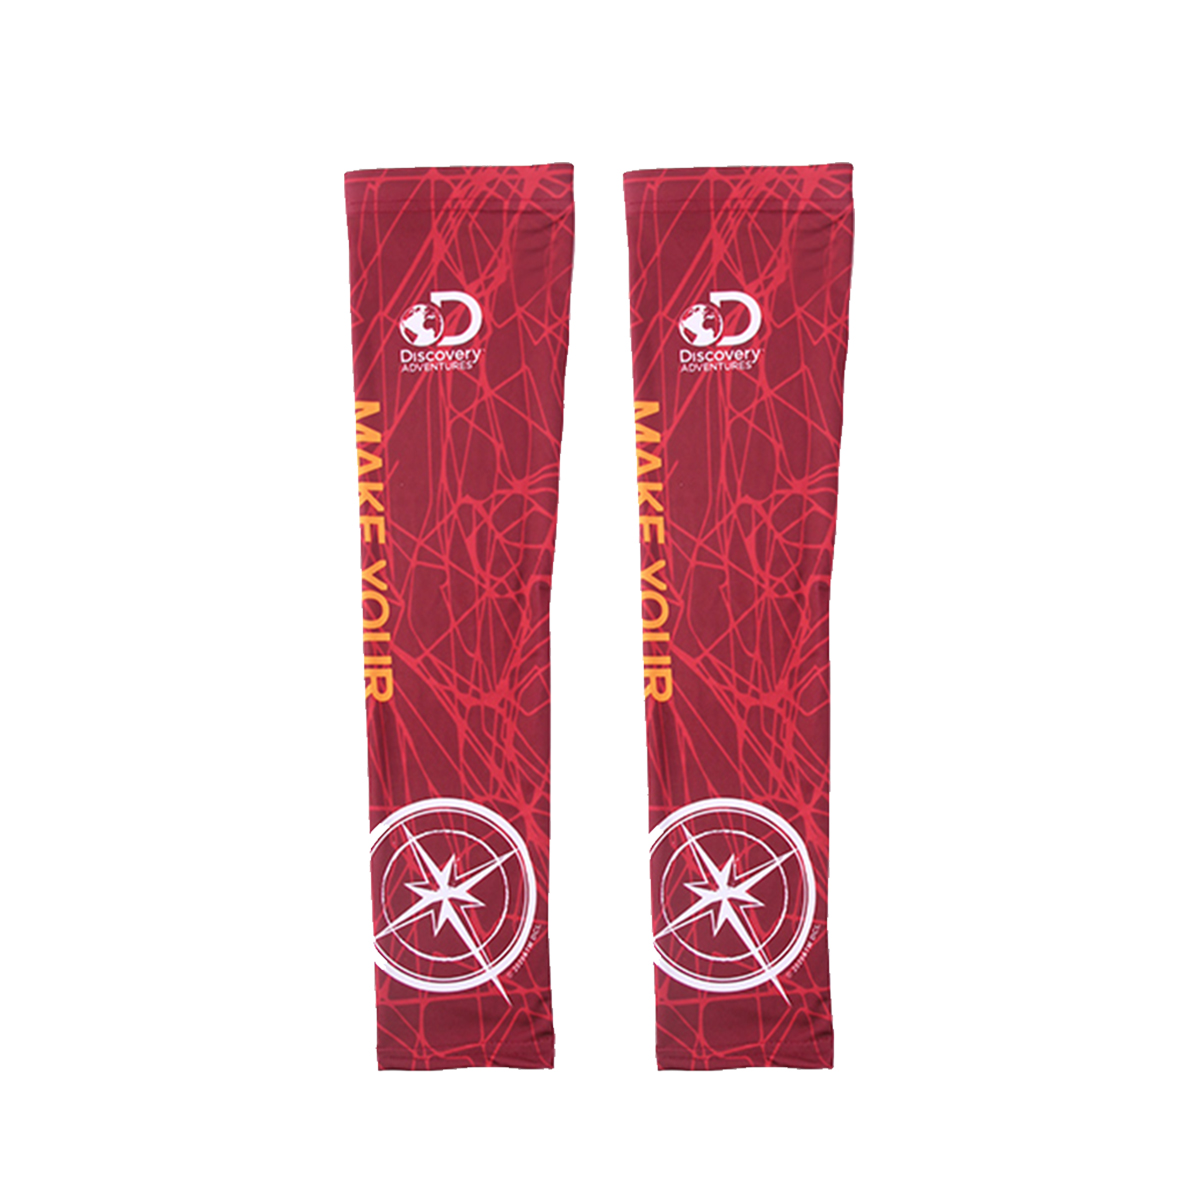 DISCOVERY ADVENTURES OUTDOOR DFG21535 ARM SLEEVES